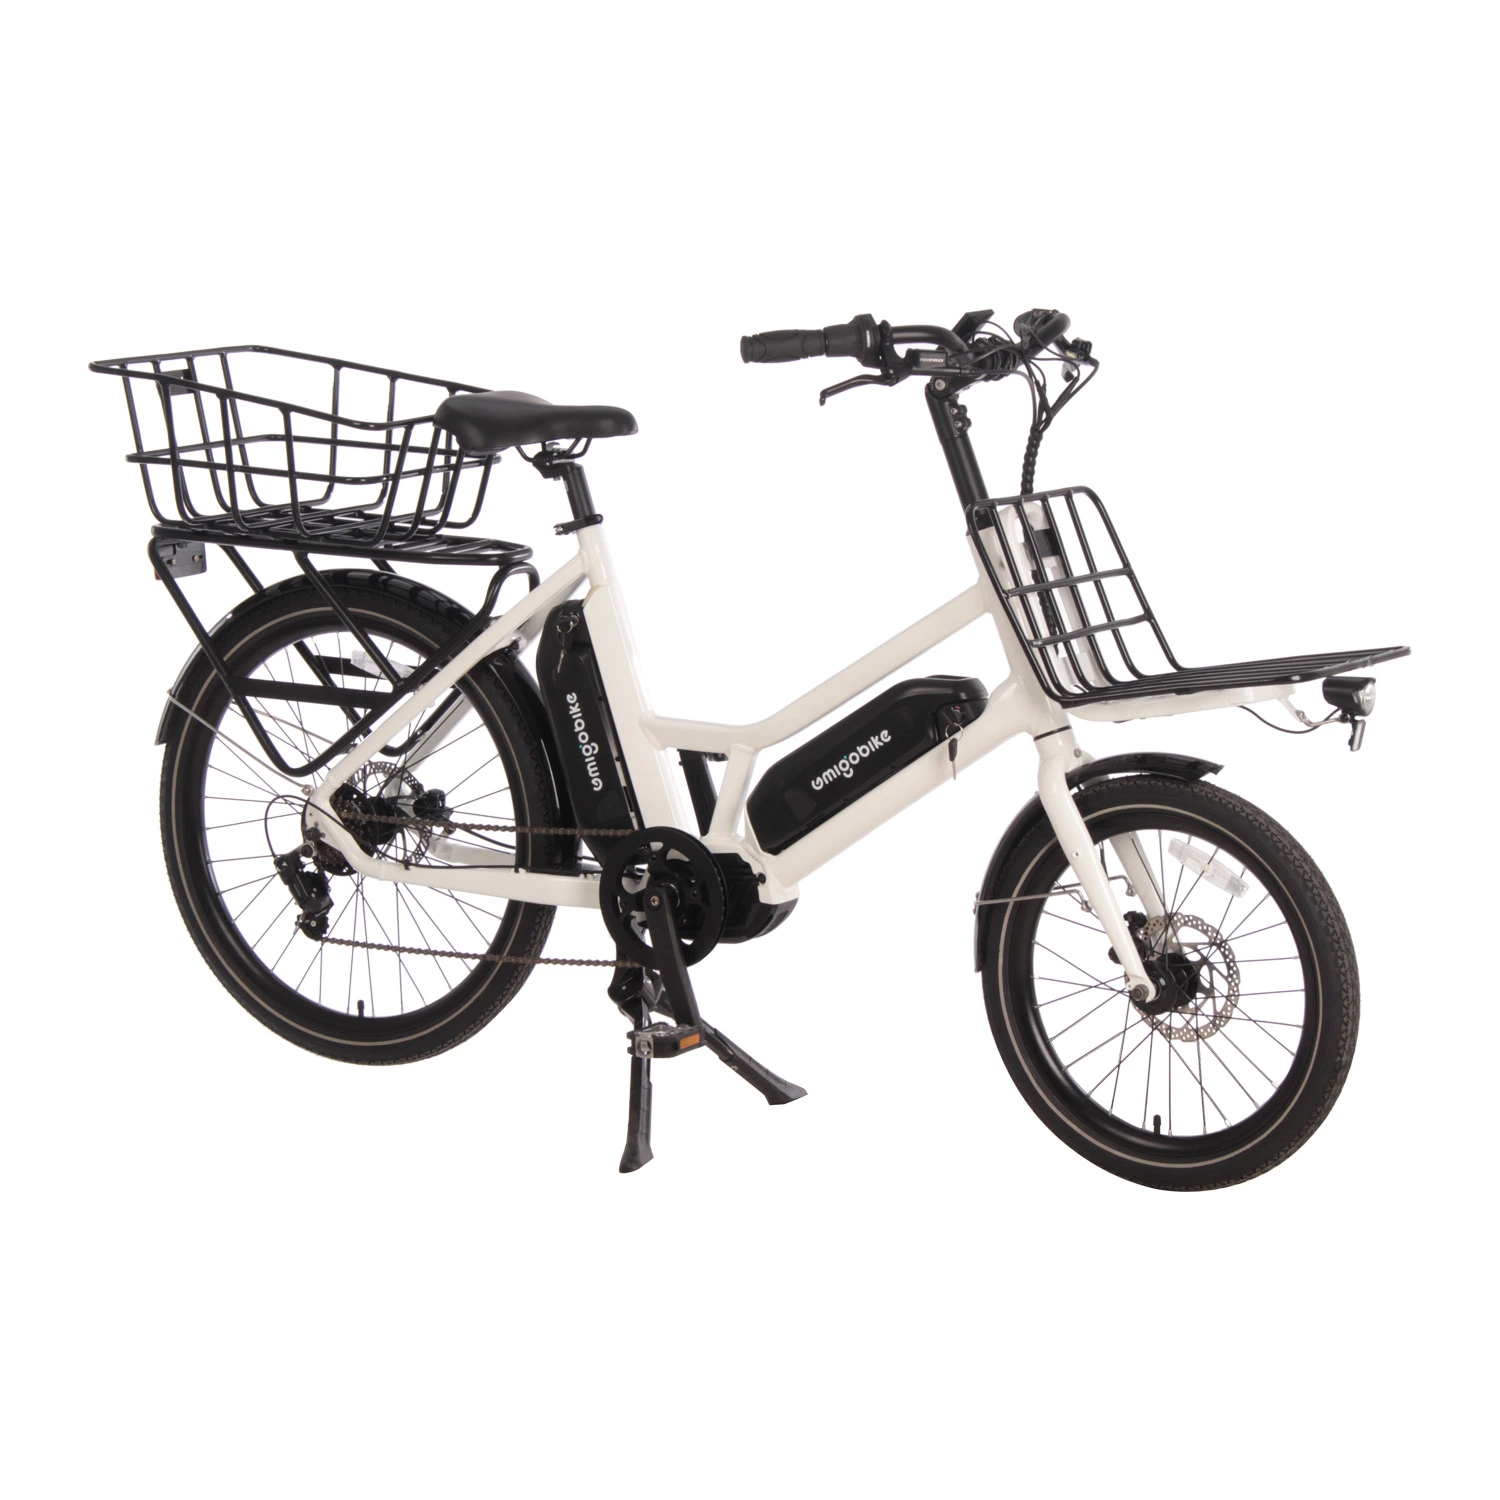 Delivery Aluminum Alloy Frame 20/26*2.125 Tyre Cargo Electric Bike